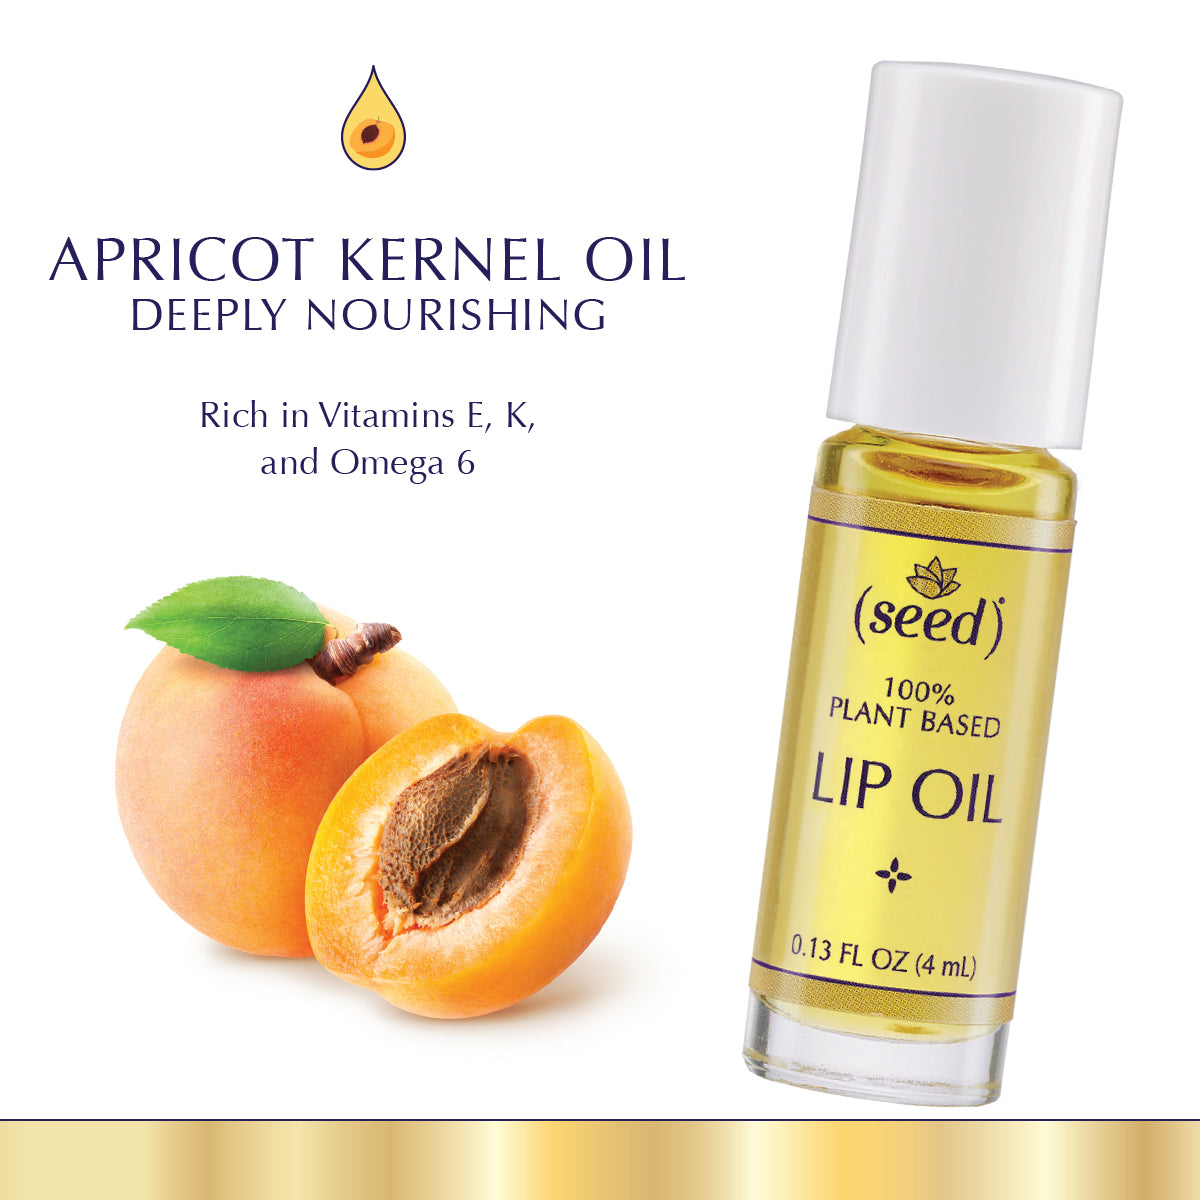 Seed Lip Oil is enriched with apricot kernel oil